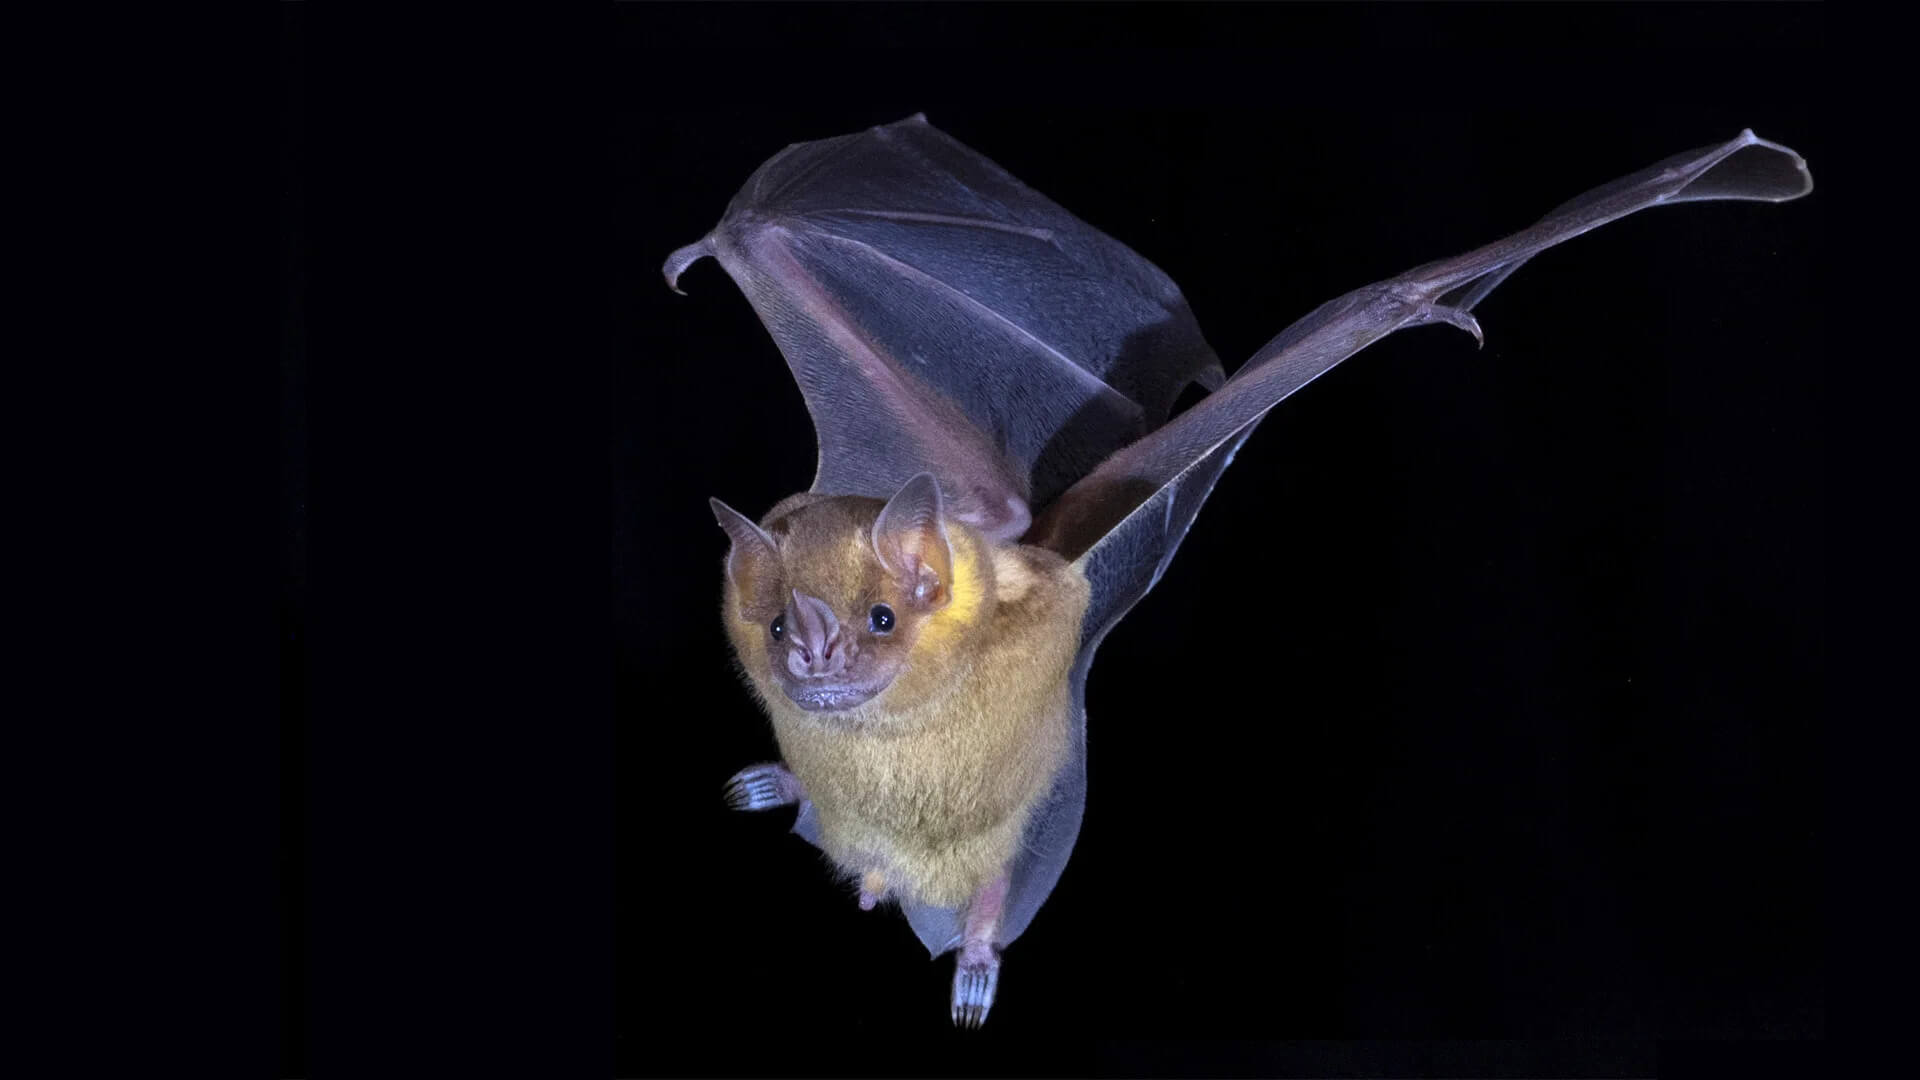 CSHL postdoc Armin Scheben, with help from McCombie lab members Sara Goodwin and Melissa Kramer, created the first complete genome sequences of Artibeus jamaicensis, the Jamaican fruit bat (seen here), and Pteronotus mesoamericanus, the Mesoamerican mustached bat.